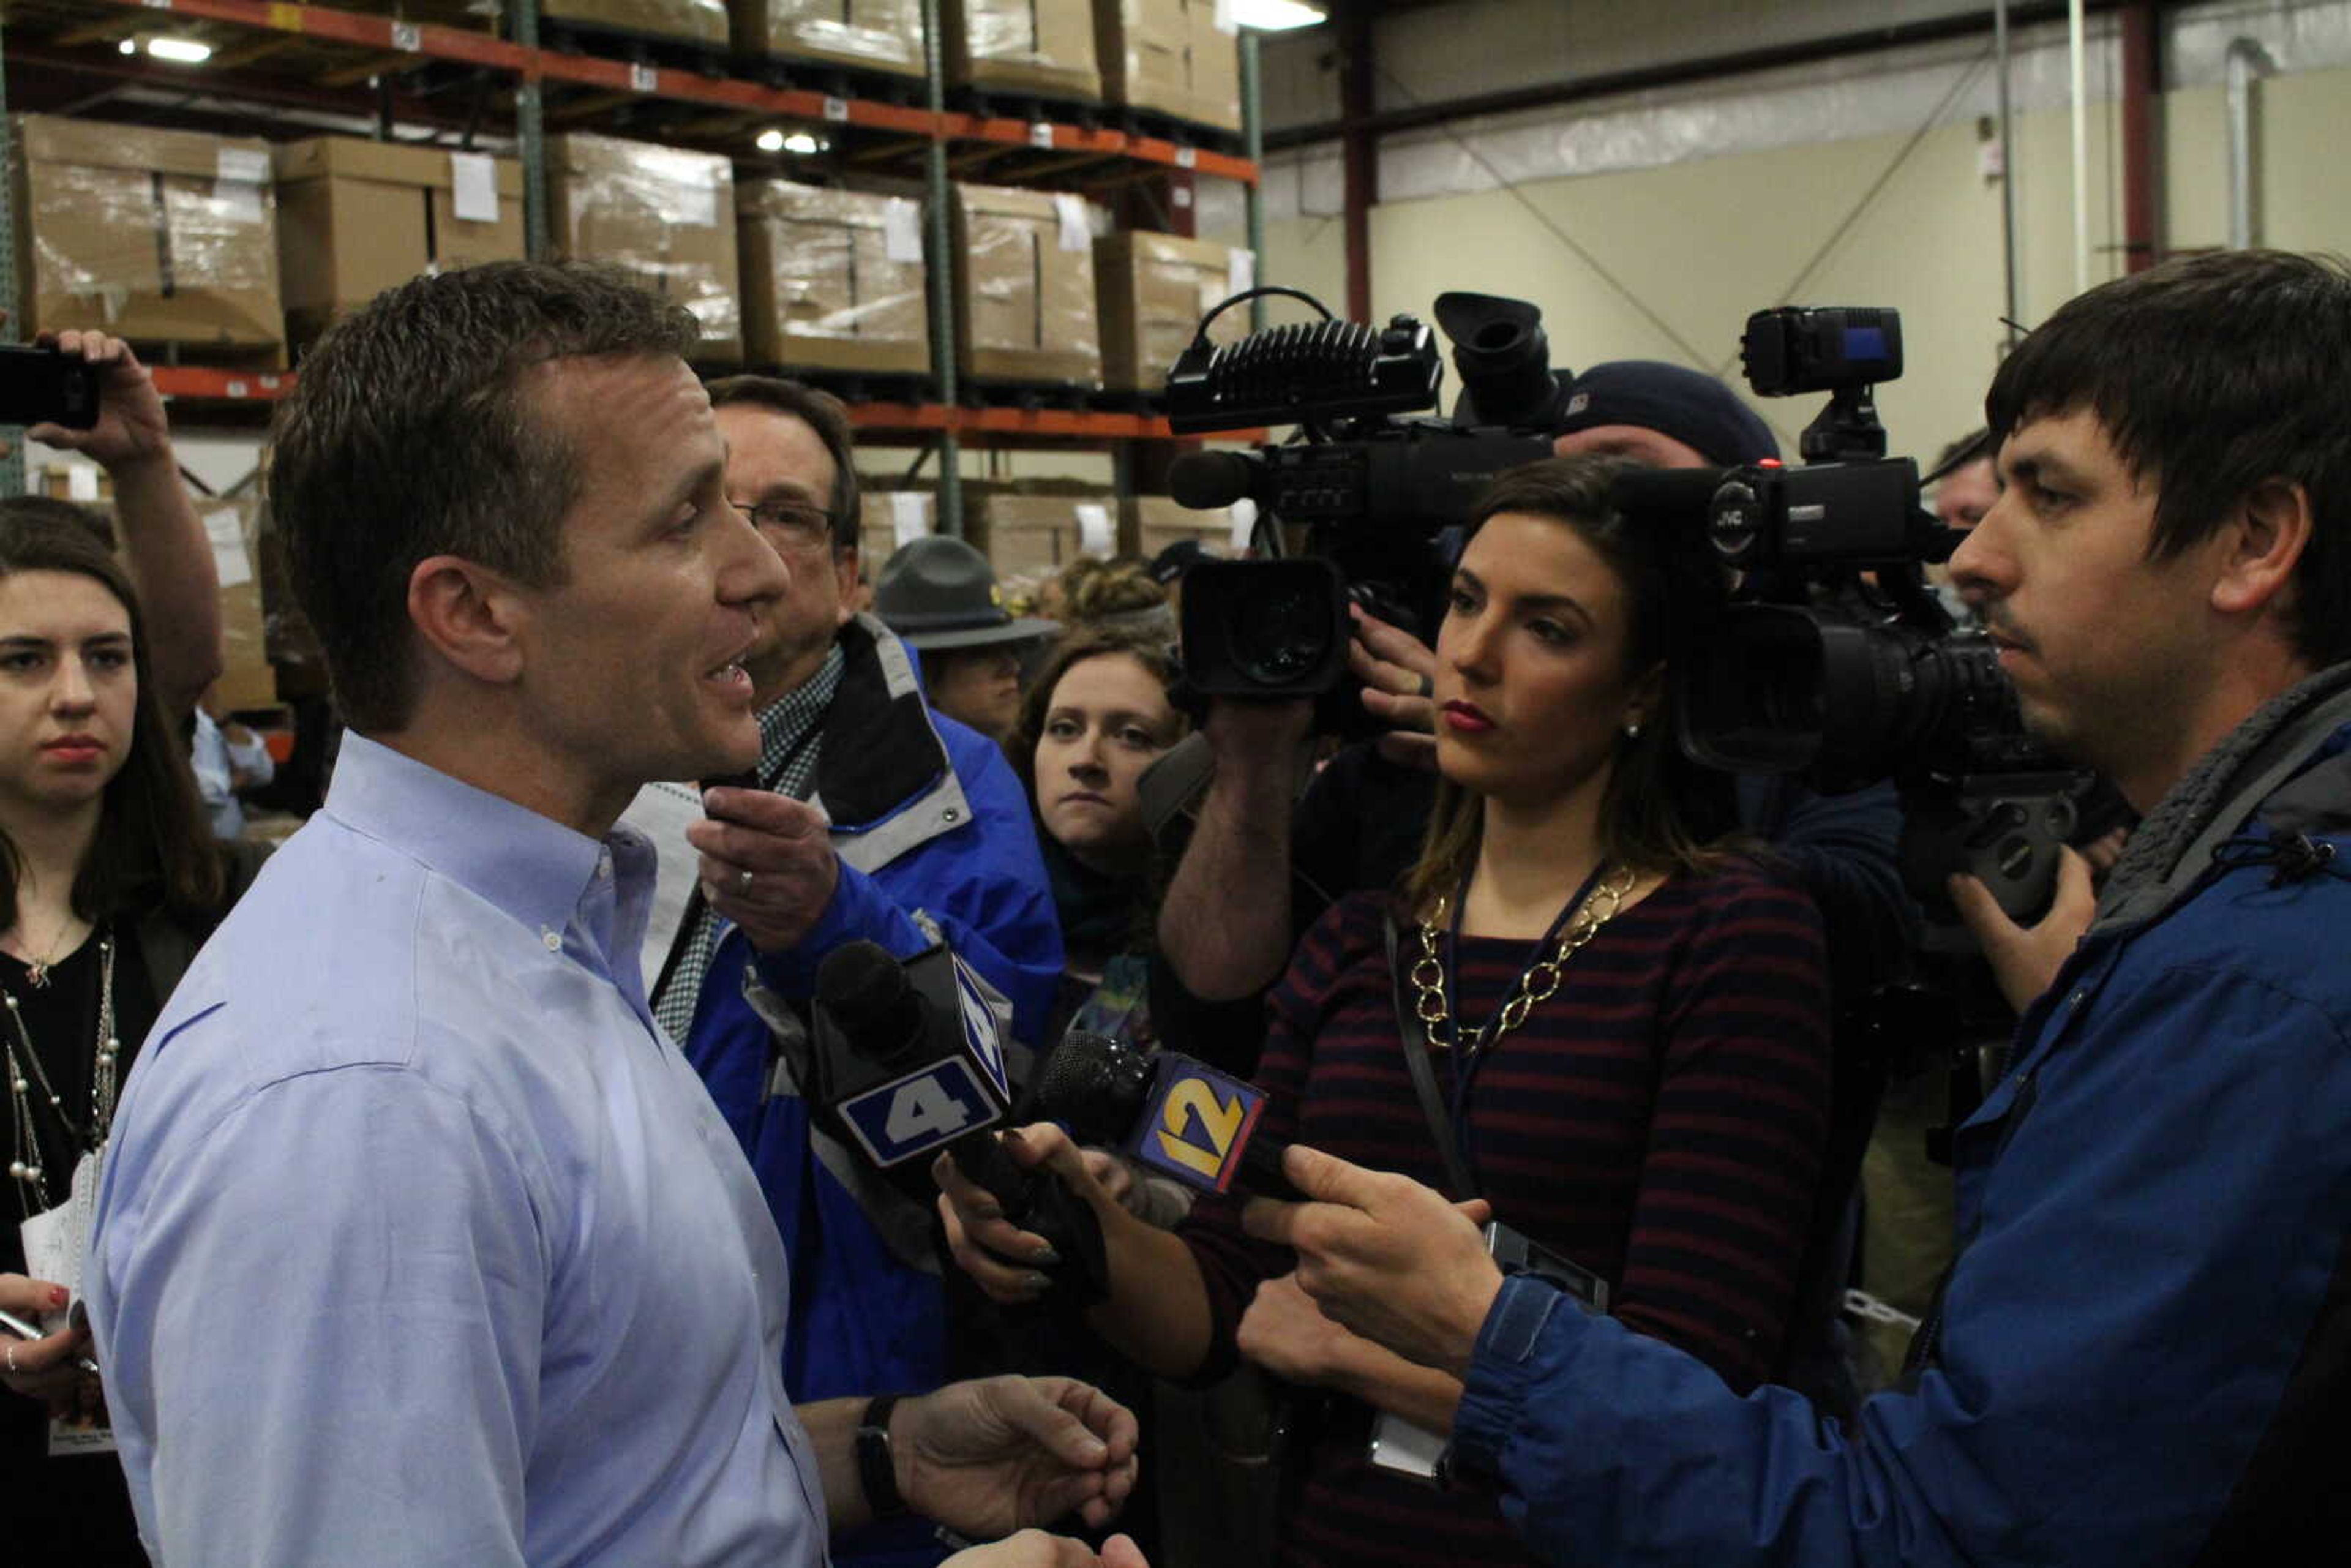 After the speech, Greitens answered questions from reporters, many of whom were particularly interested in his plan for higher education. No comments regarding higher education were mentioned in Greitens’ speech at Signature Packing & Paper on Jan. 29.